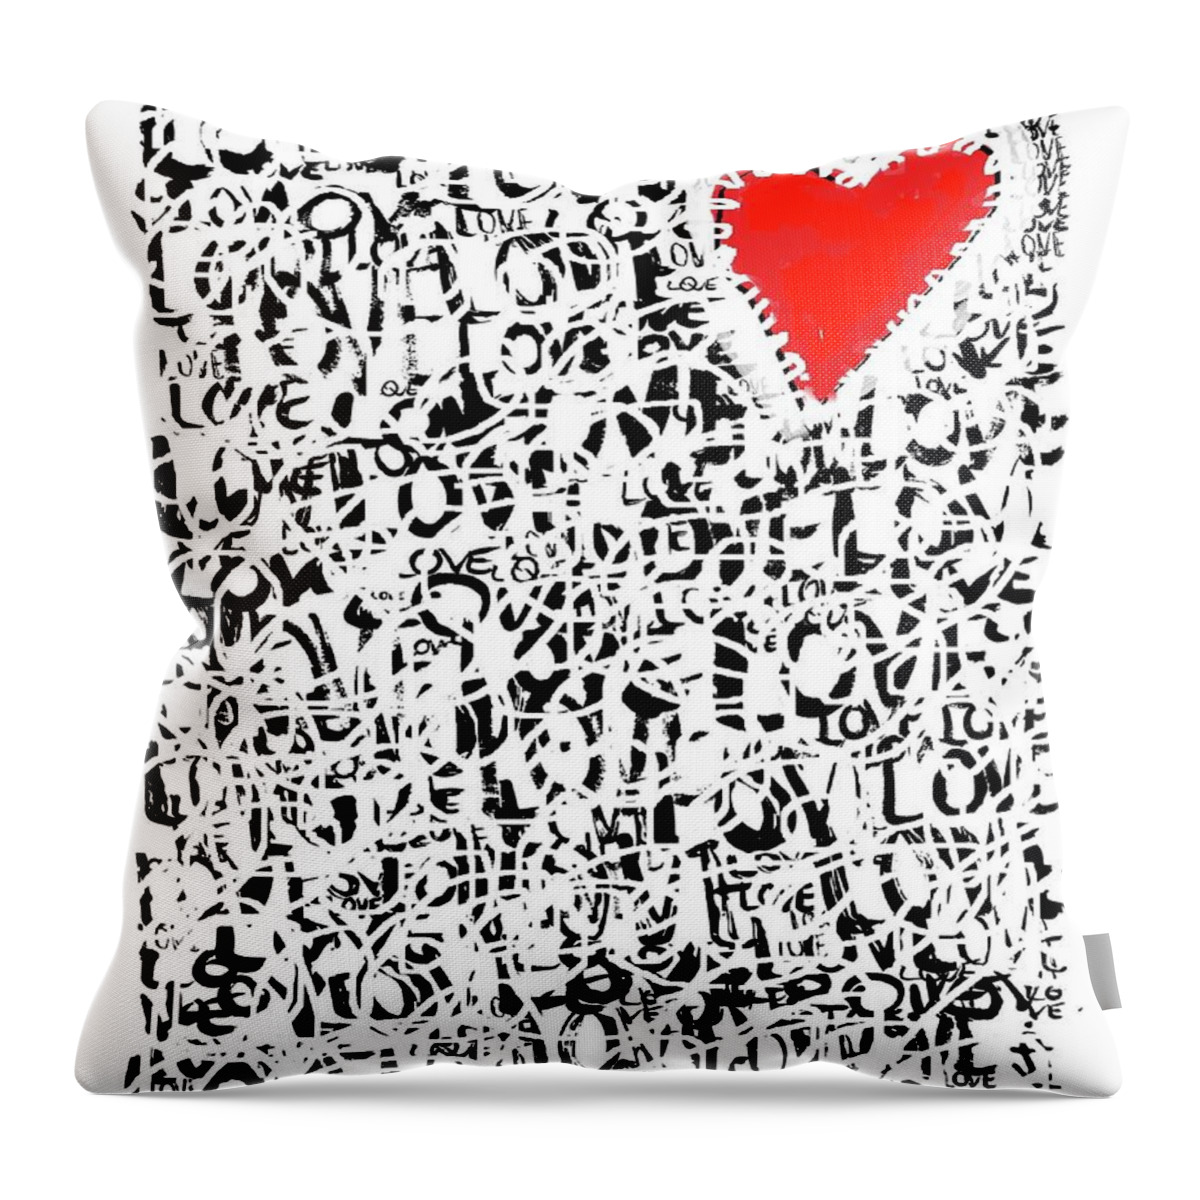 Love Throw Pillow featuring the digital art Love Red heart by Vesna Antic